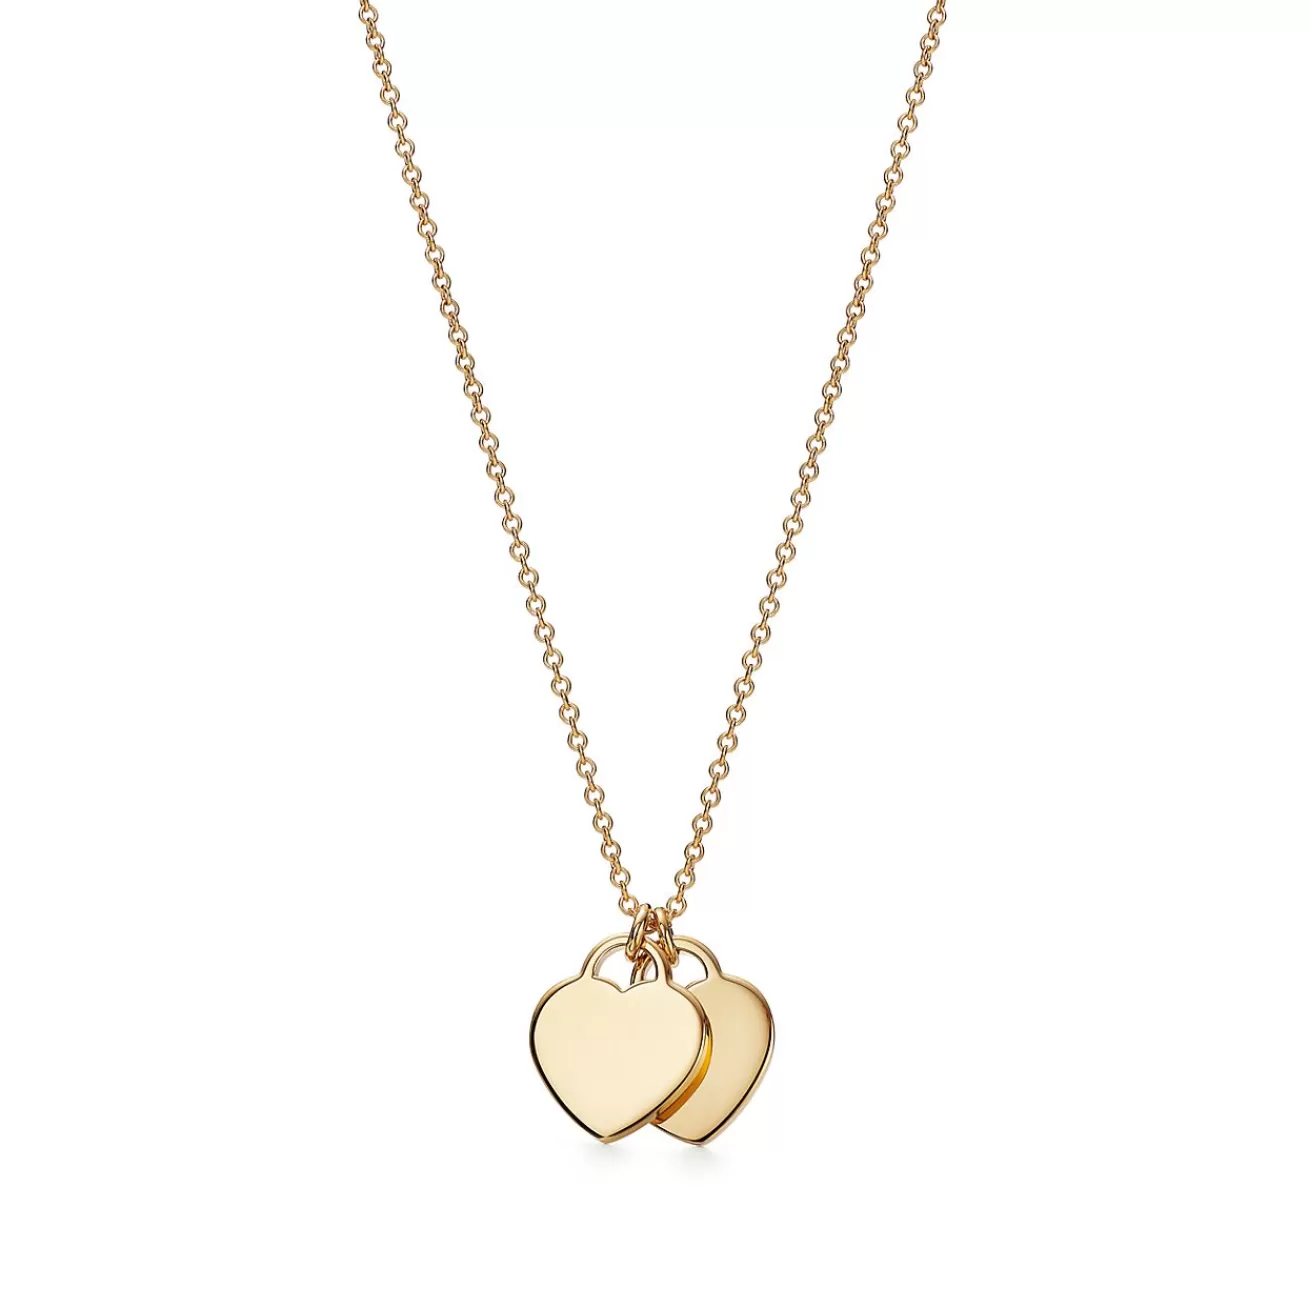 Tiffany & Co. Return to Tiffany® mini double heart tag pendant in 18k gold. | ^ Necklaces & Pendants | Gold Jewelry